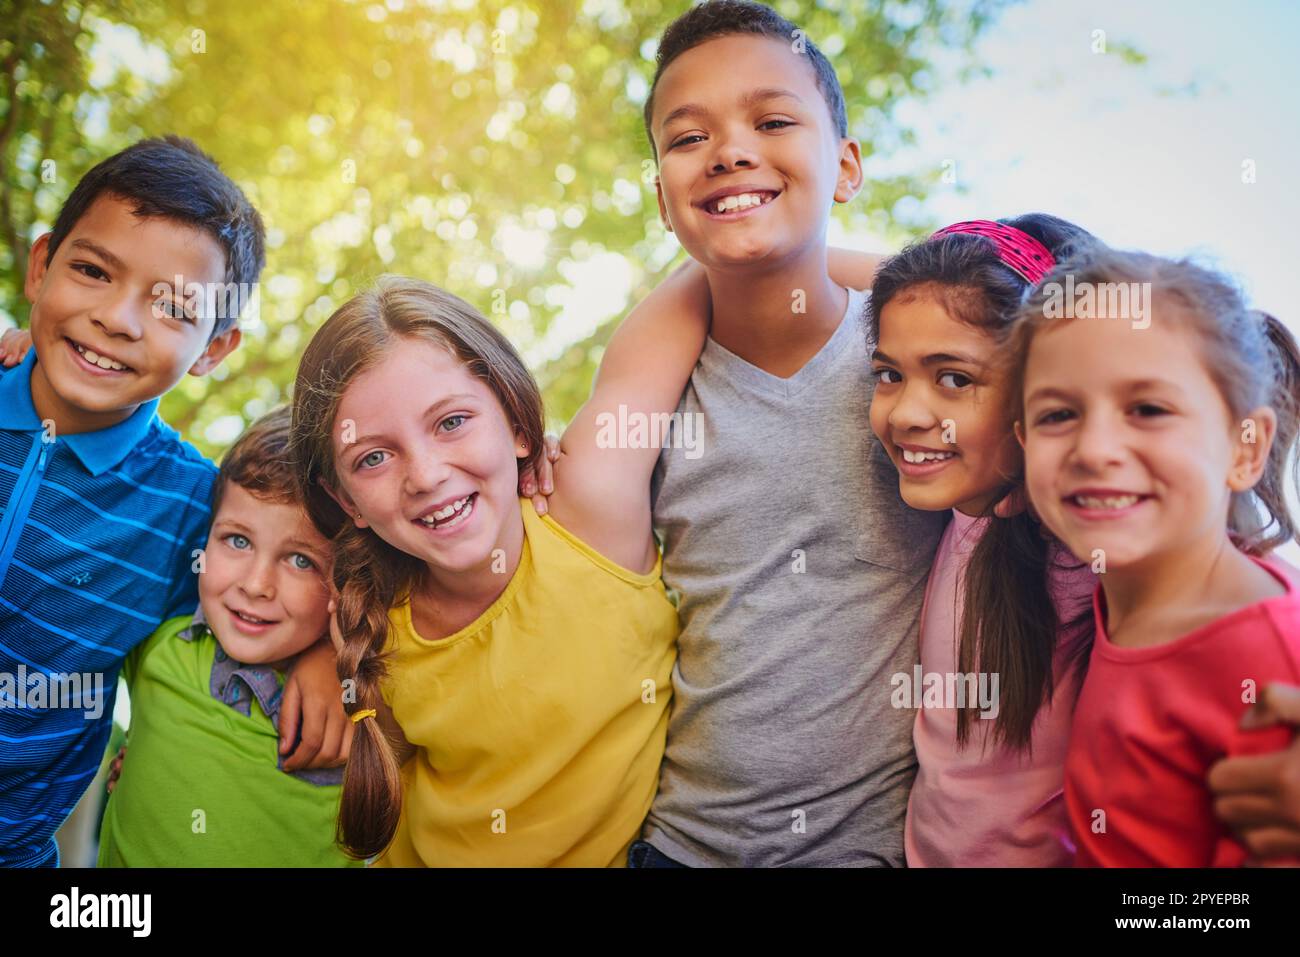 The fun never stops when you a kid. a diverse group of children outside. Stock Photo